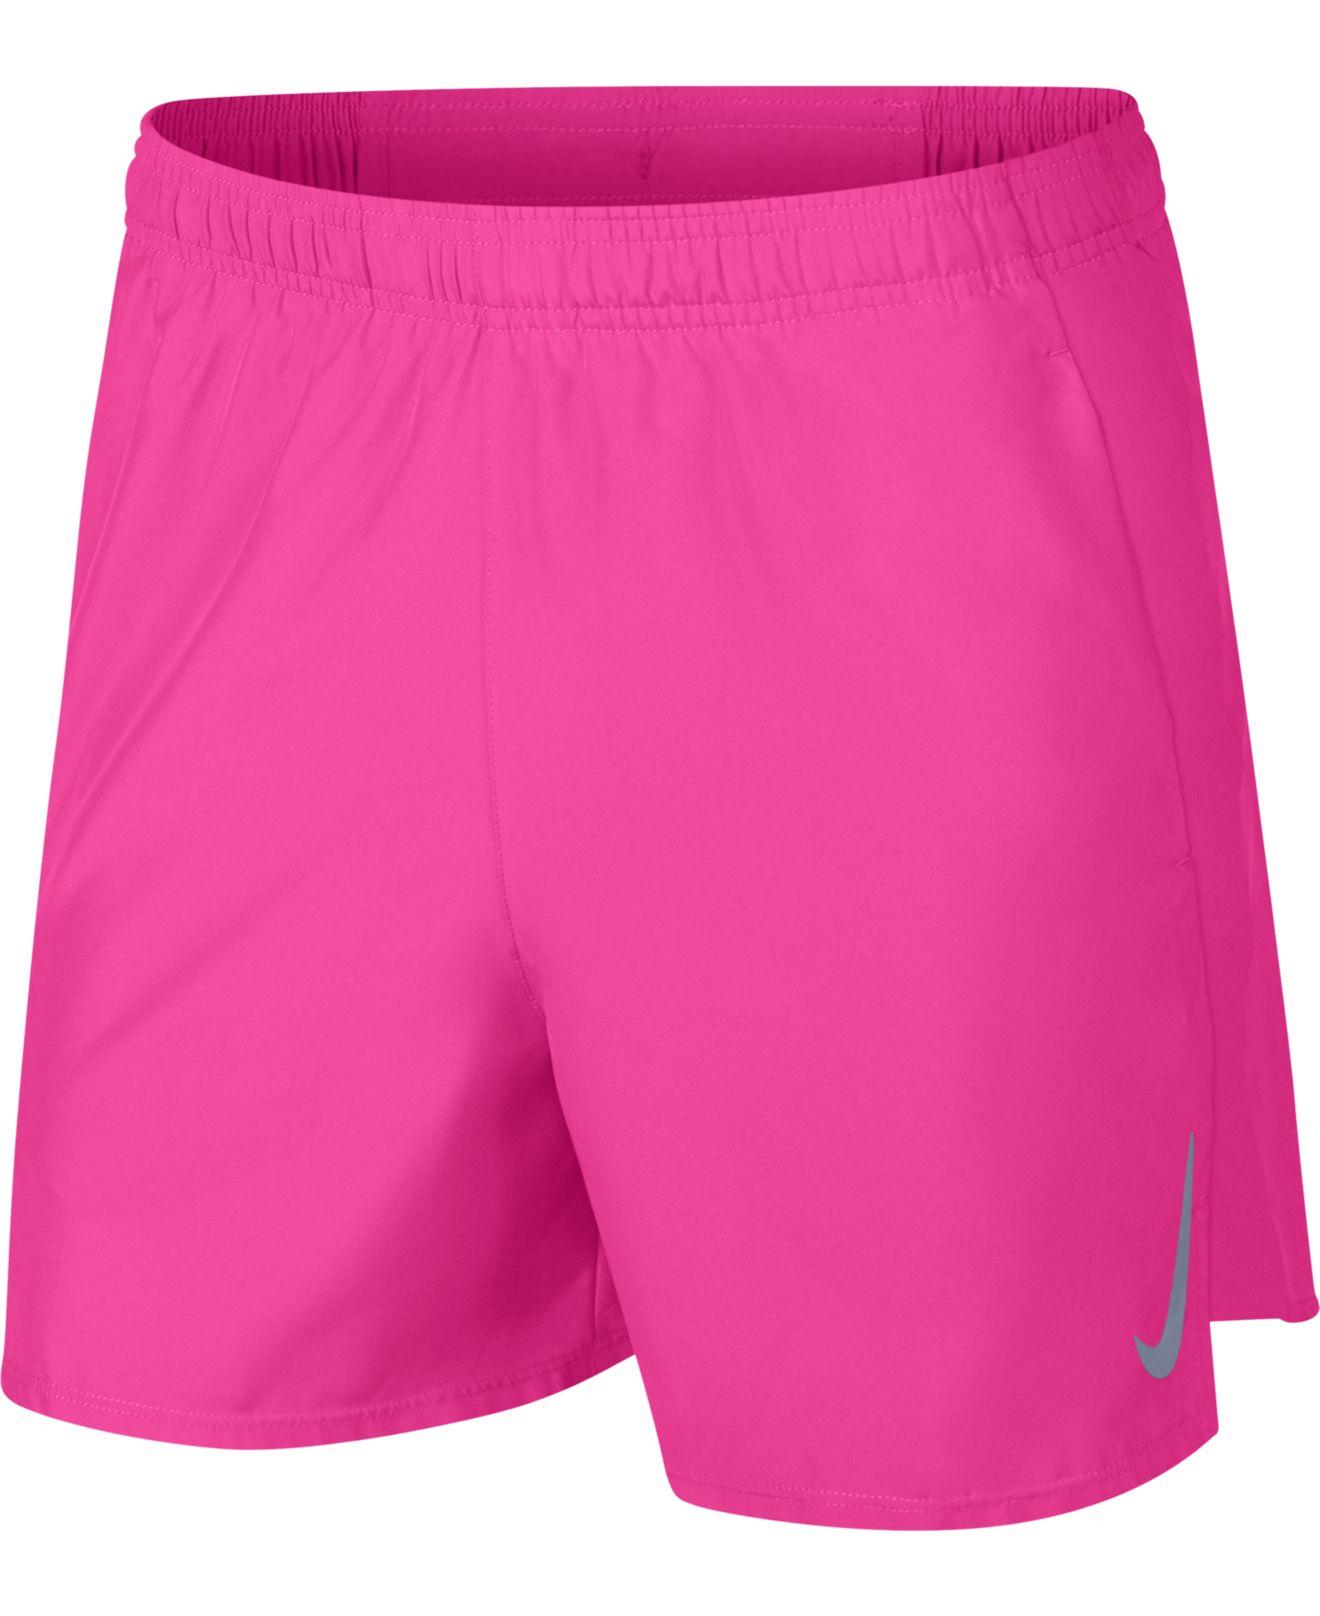 Nike Challenger Dri-fit 5'' Running Shorts in Pink for Men - Lyst